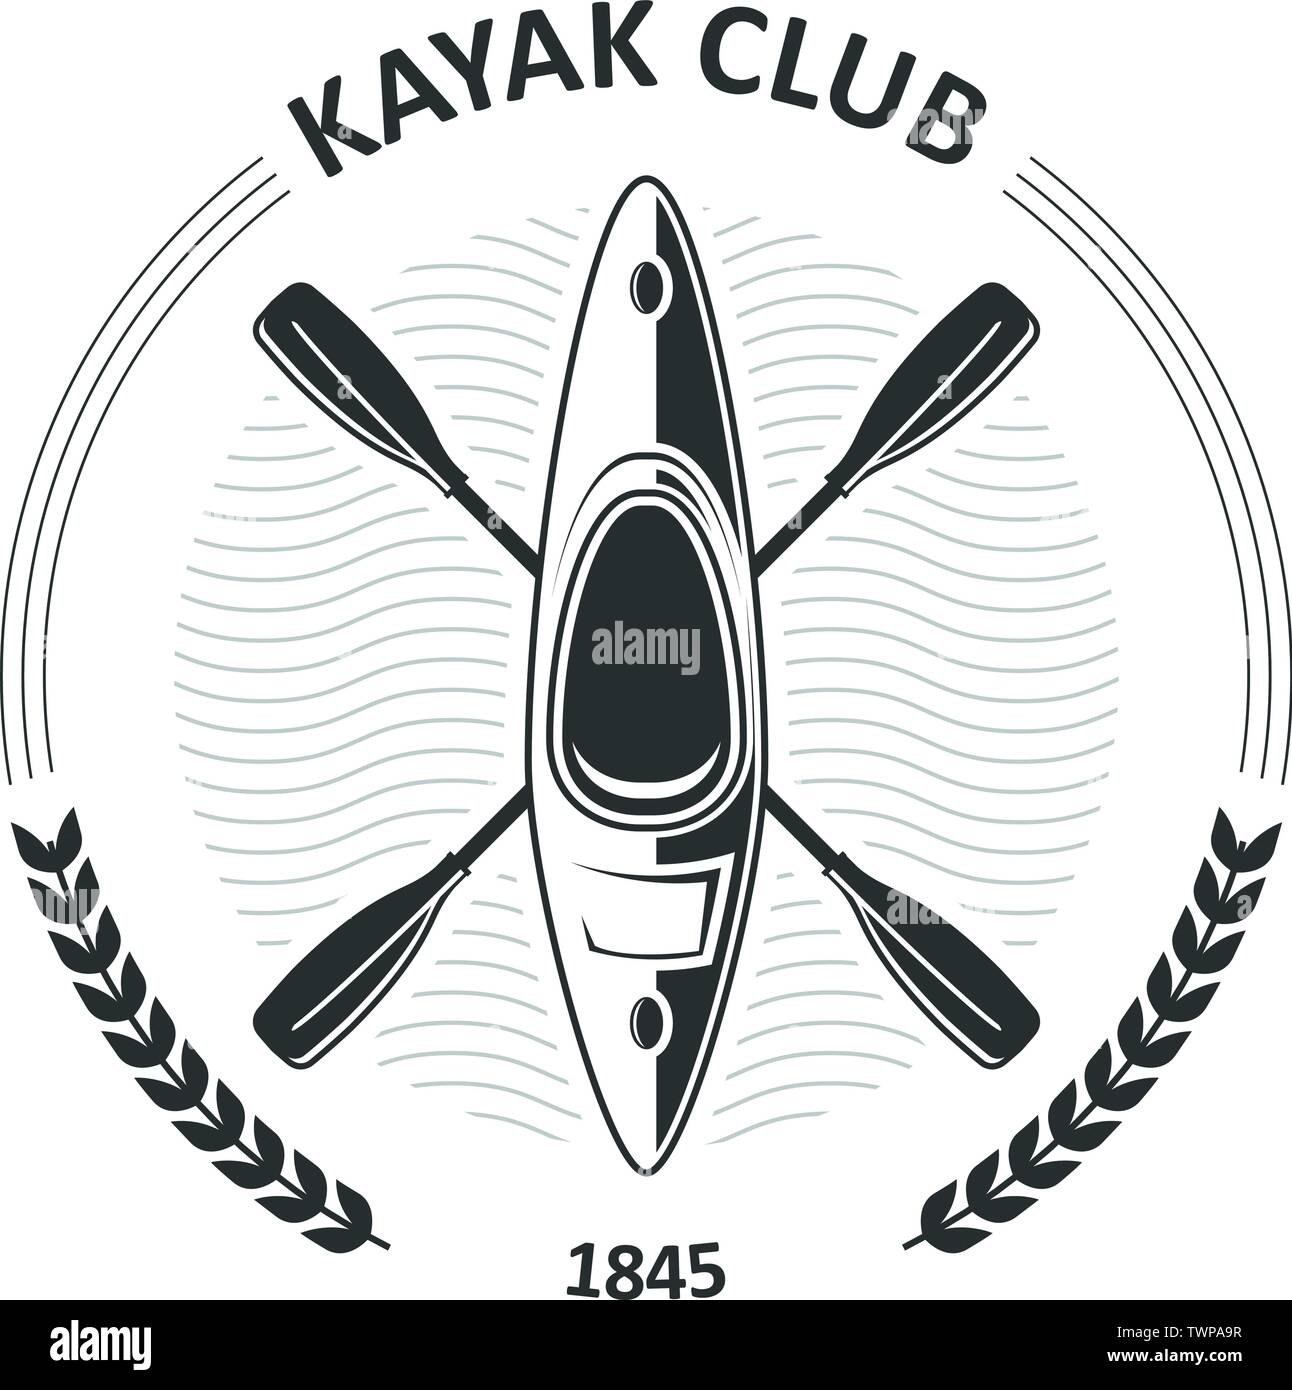 Kayaking club emblems - canoe and two crossed paddles, kayak label Stock Vector